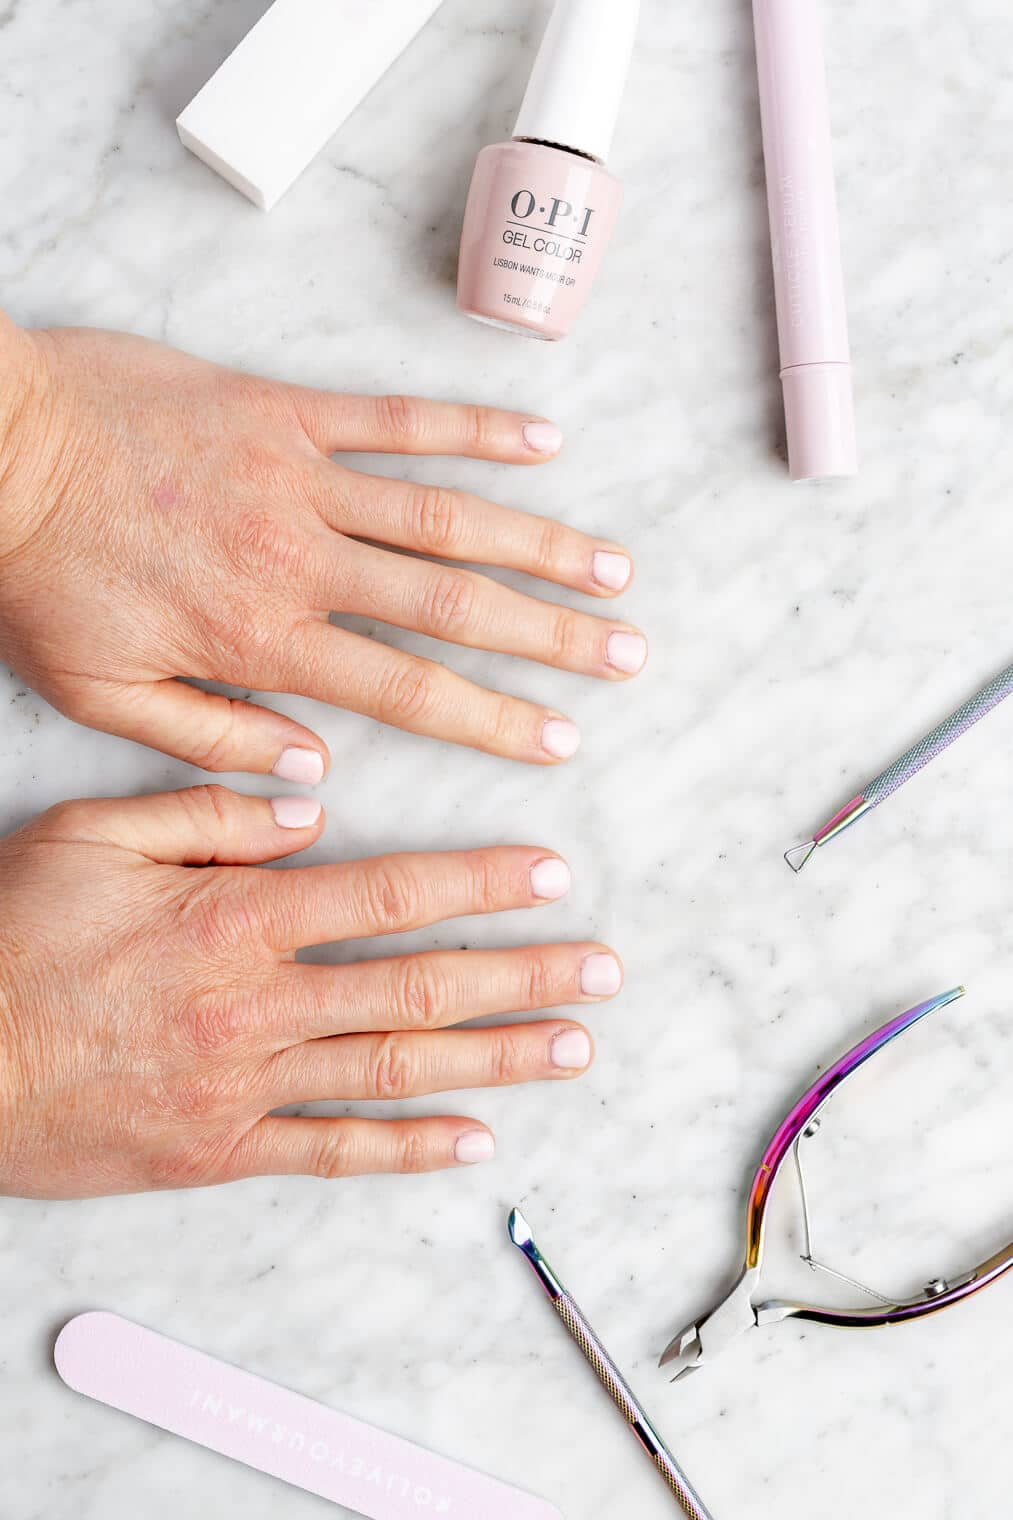 Hands with light pink painted nails on a grey and white marble surface surrounded by nail tools.